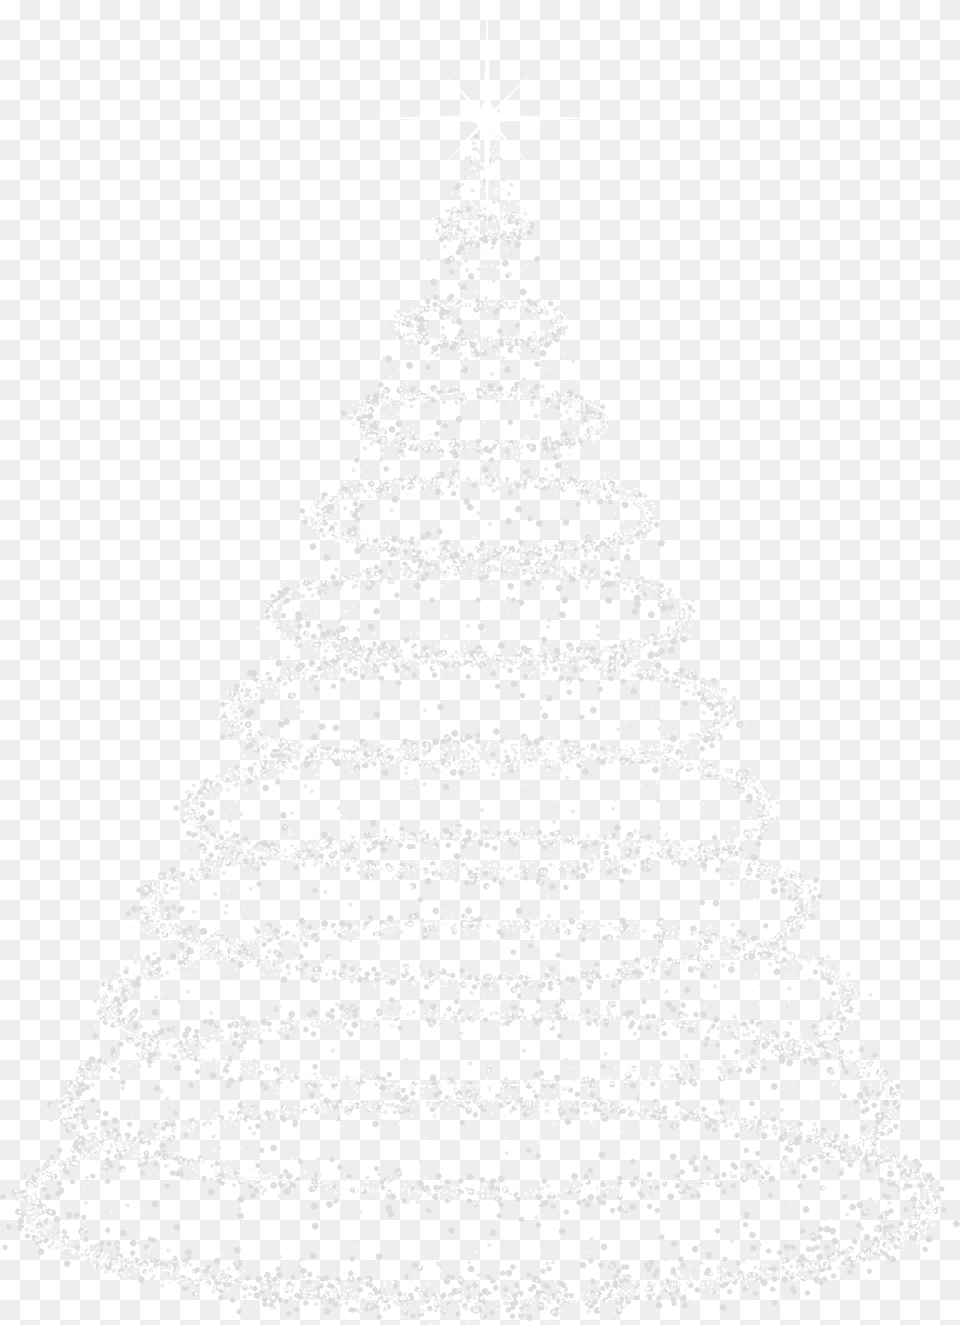 Deco Christmas Tree Clip Art Image All White Christmas Tree, Christmas Decorations, Festival, Christmas Tree, Chandelier Free Transparent Png